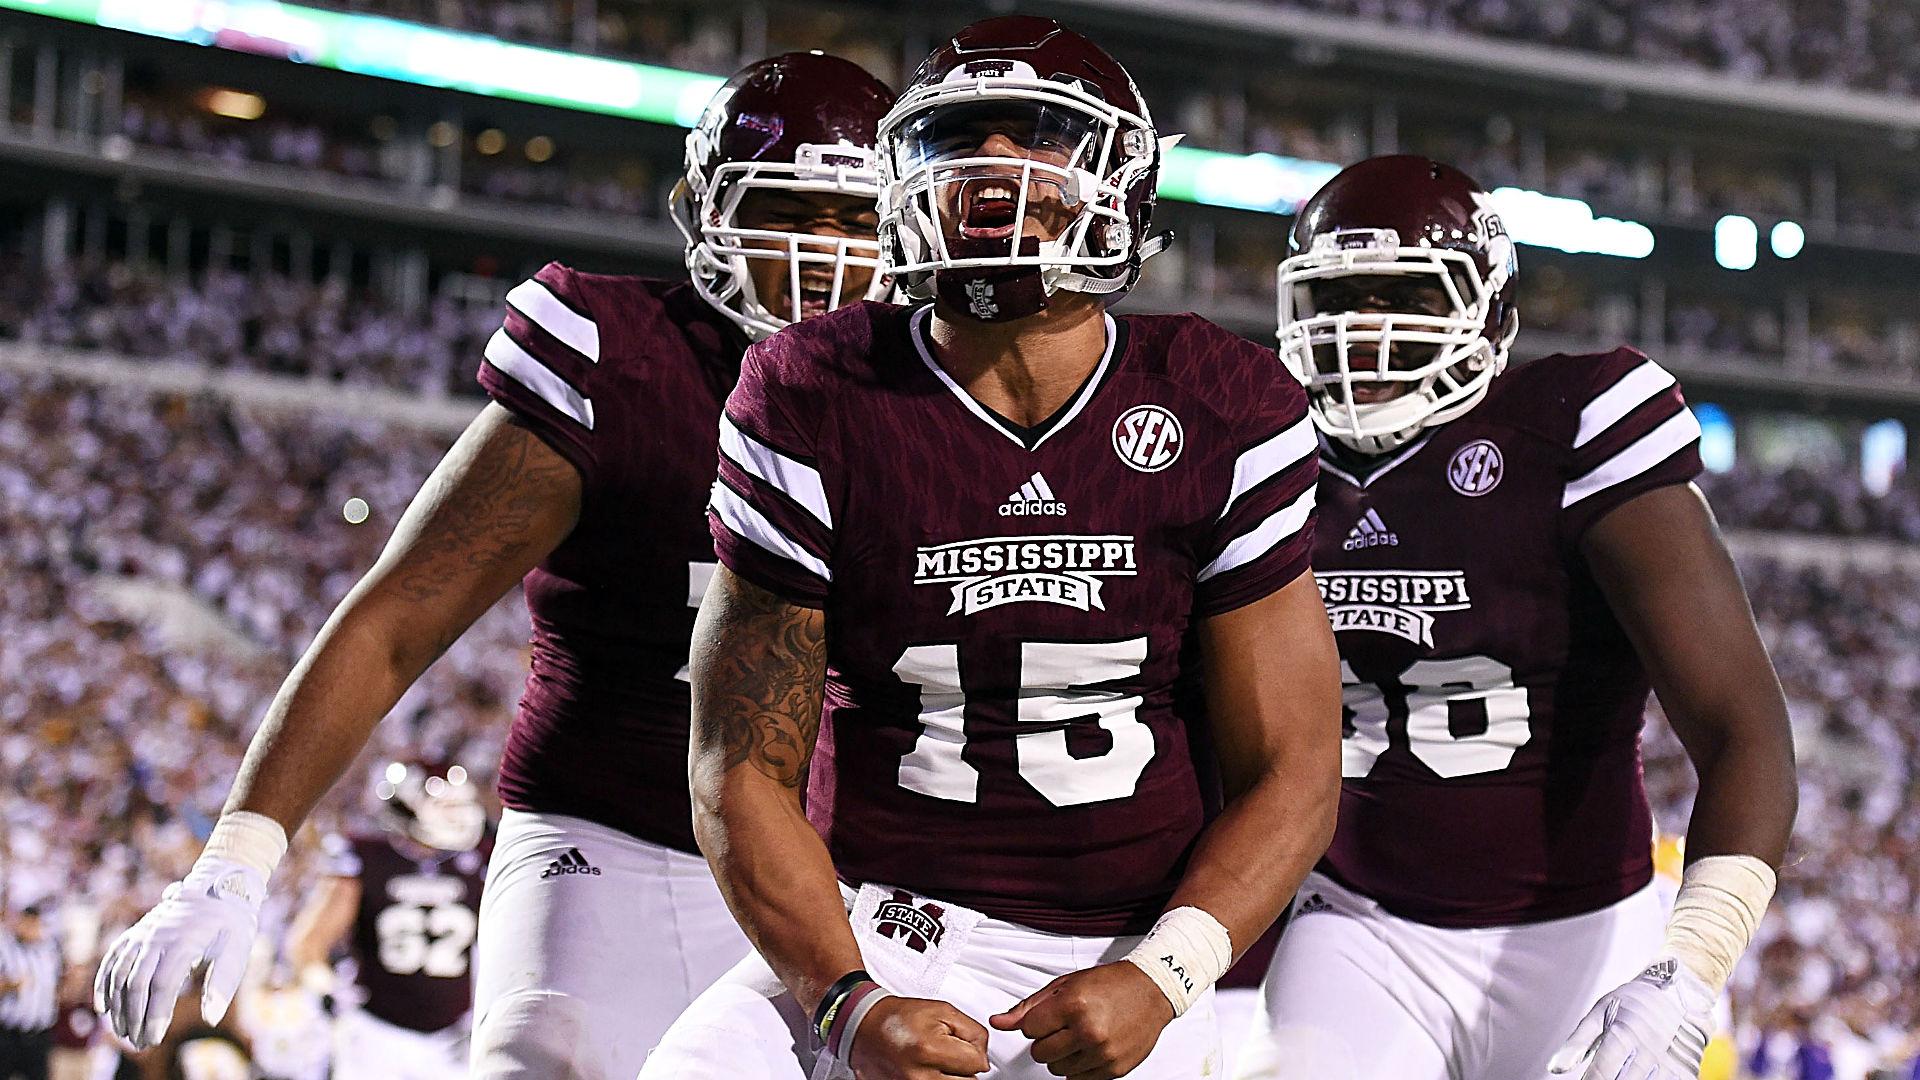 Mississippi State doesn't plan on coming down from SEC